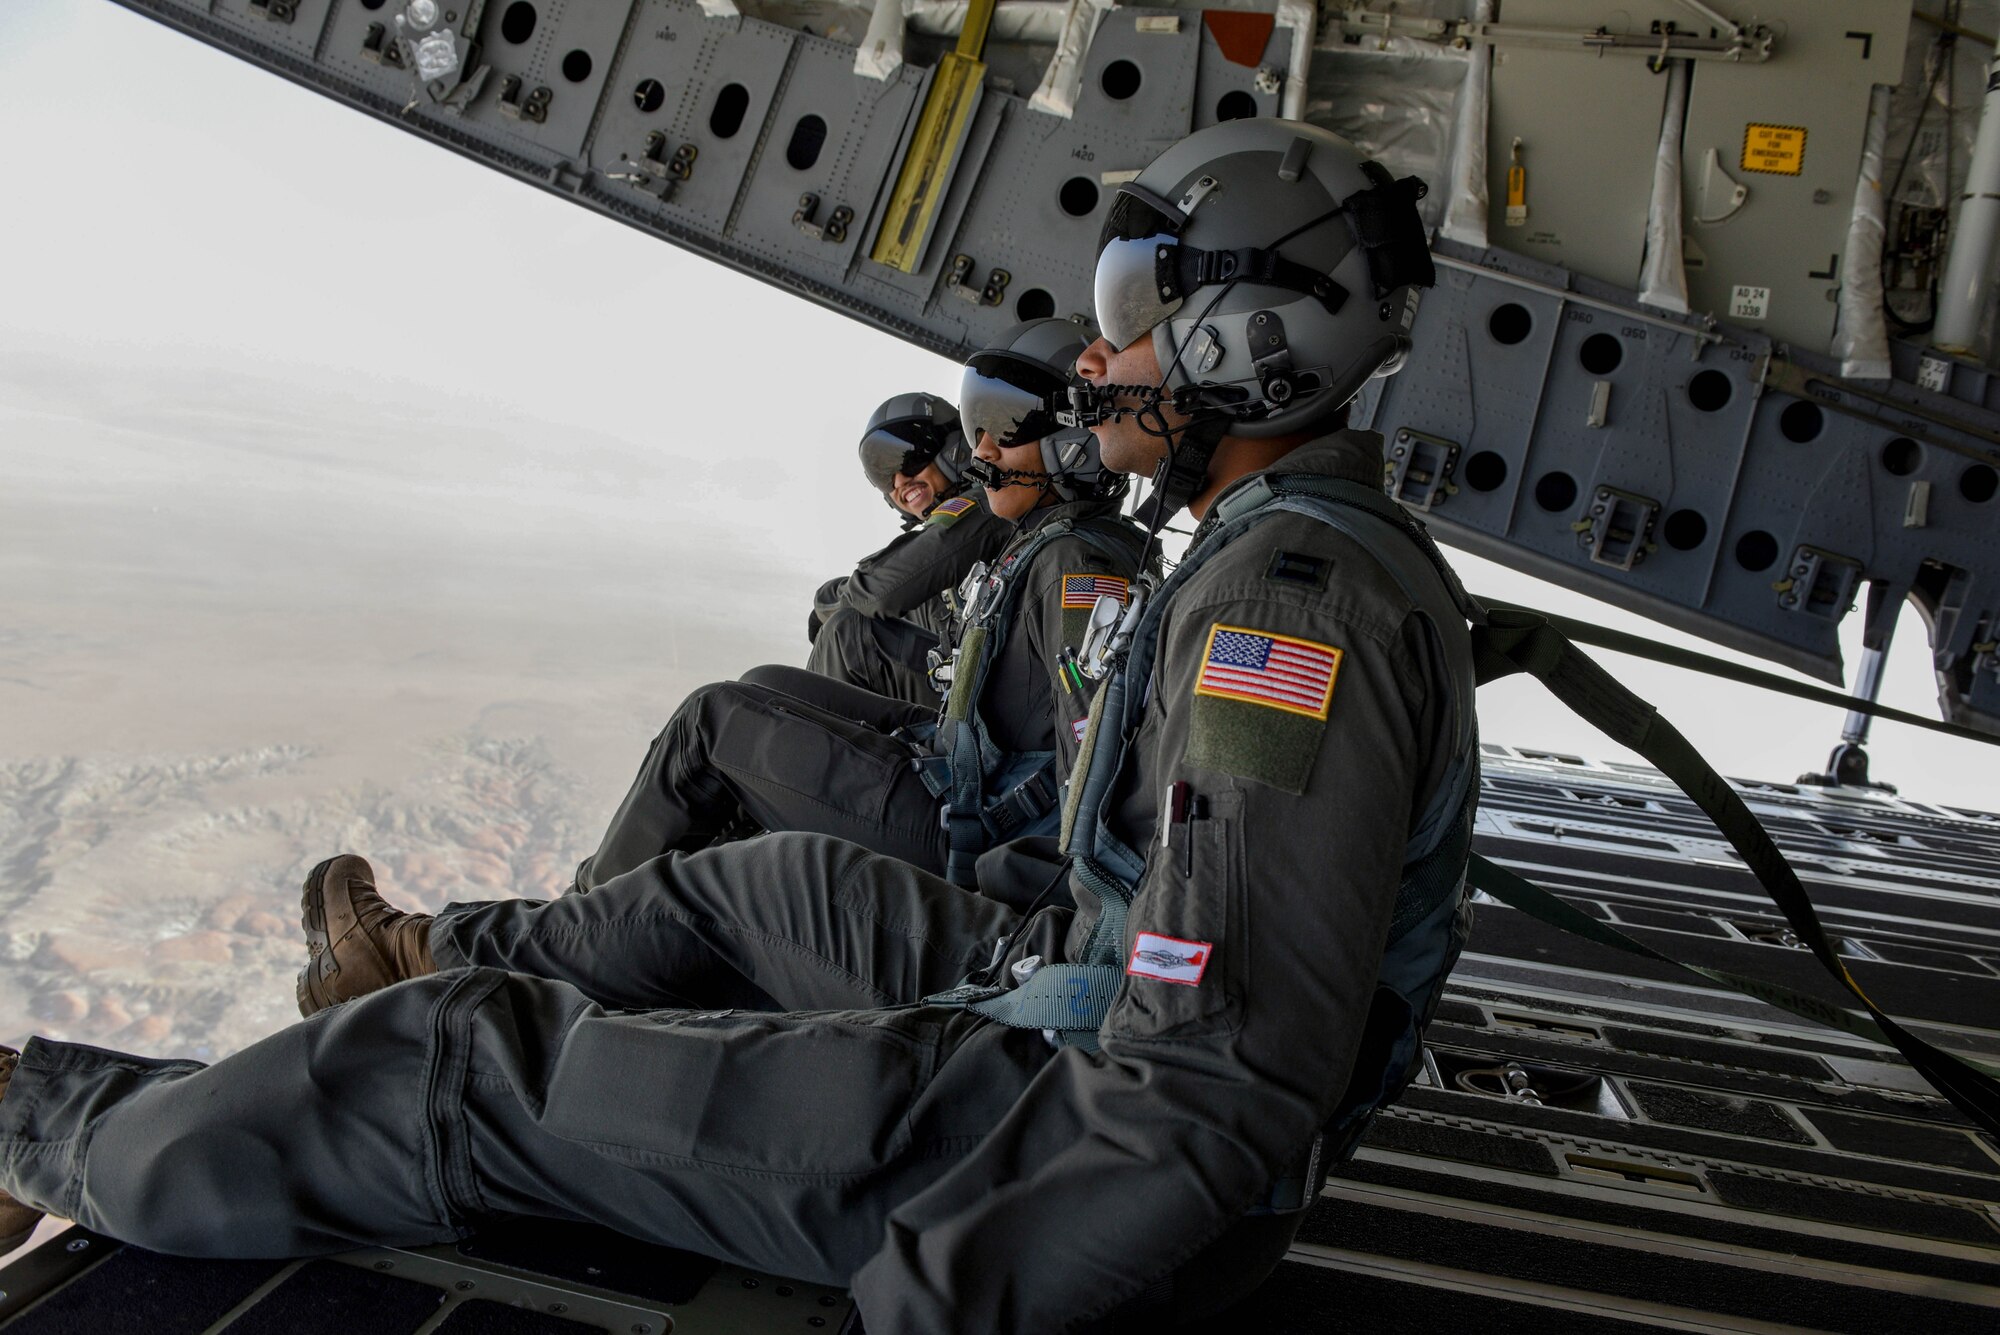 From right to left, Capt. Dre Davis, 8th Airlift Squadron pilot; 1st Lt. Erica Drakes, 4th Airlift Squadron pilot; and Airman 1st Class Tim McLaren, 8th Airlift Squadron loadmaster, watch from the back of C-17 Globemaster III during a low-level flight training exercise. During actual air-drop missions, the aircraft has to fly lower to the ground, which sometimes creates more turbulence and inconsistent wind. (U.S. Air Force photo by Senior Airman Mikayla Heineck)